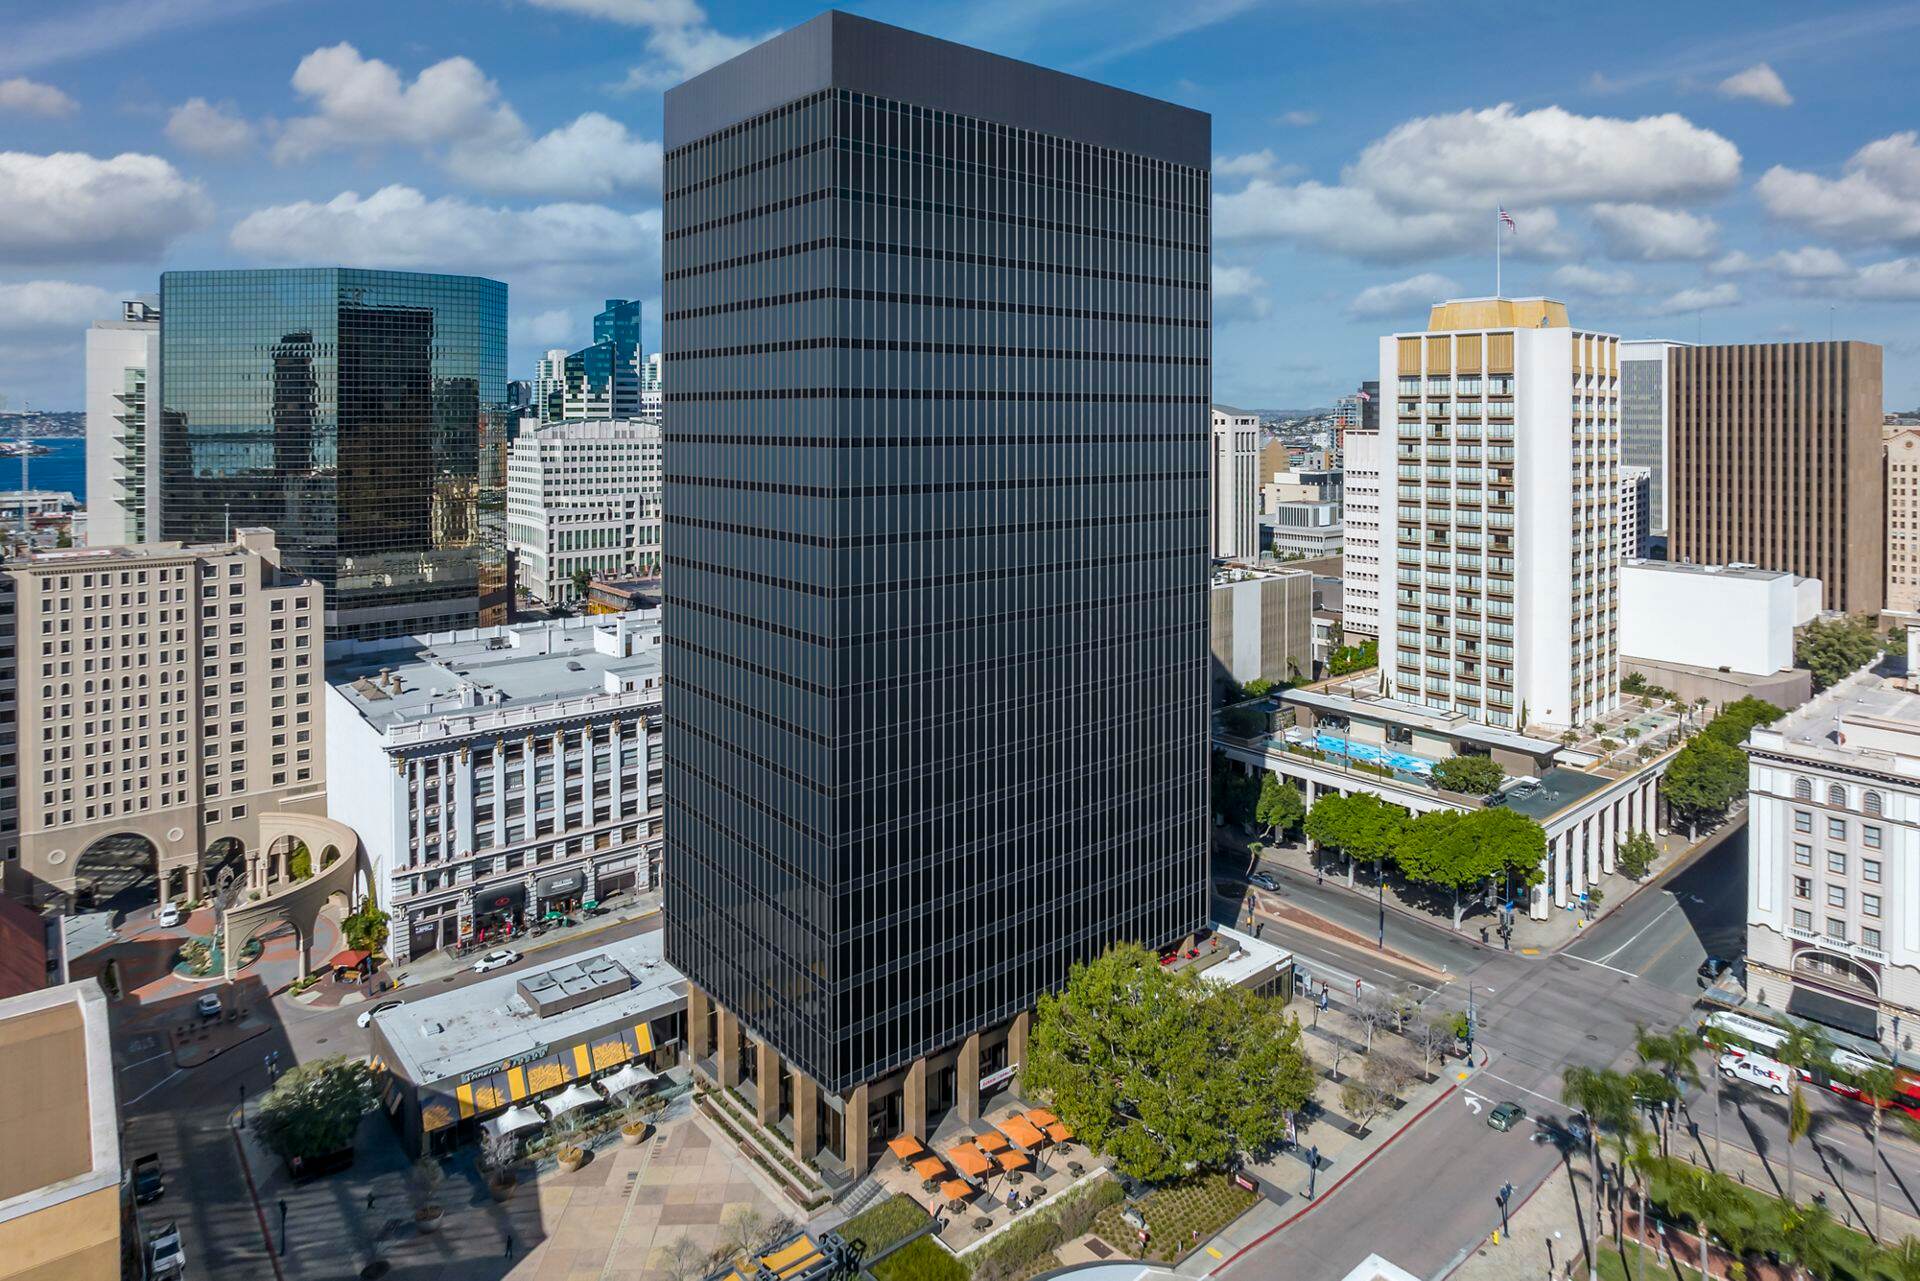 Exterior view of 225 Broadway office tower in San Diego, CA.